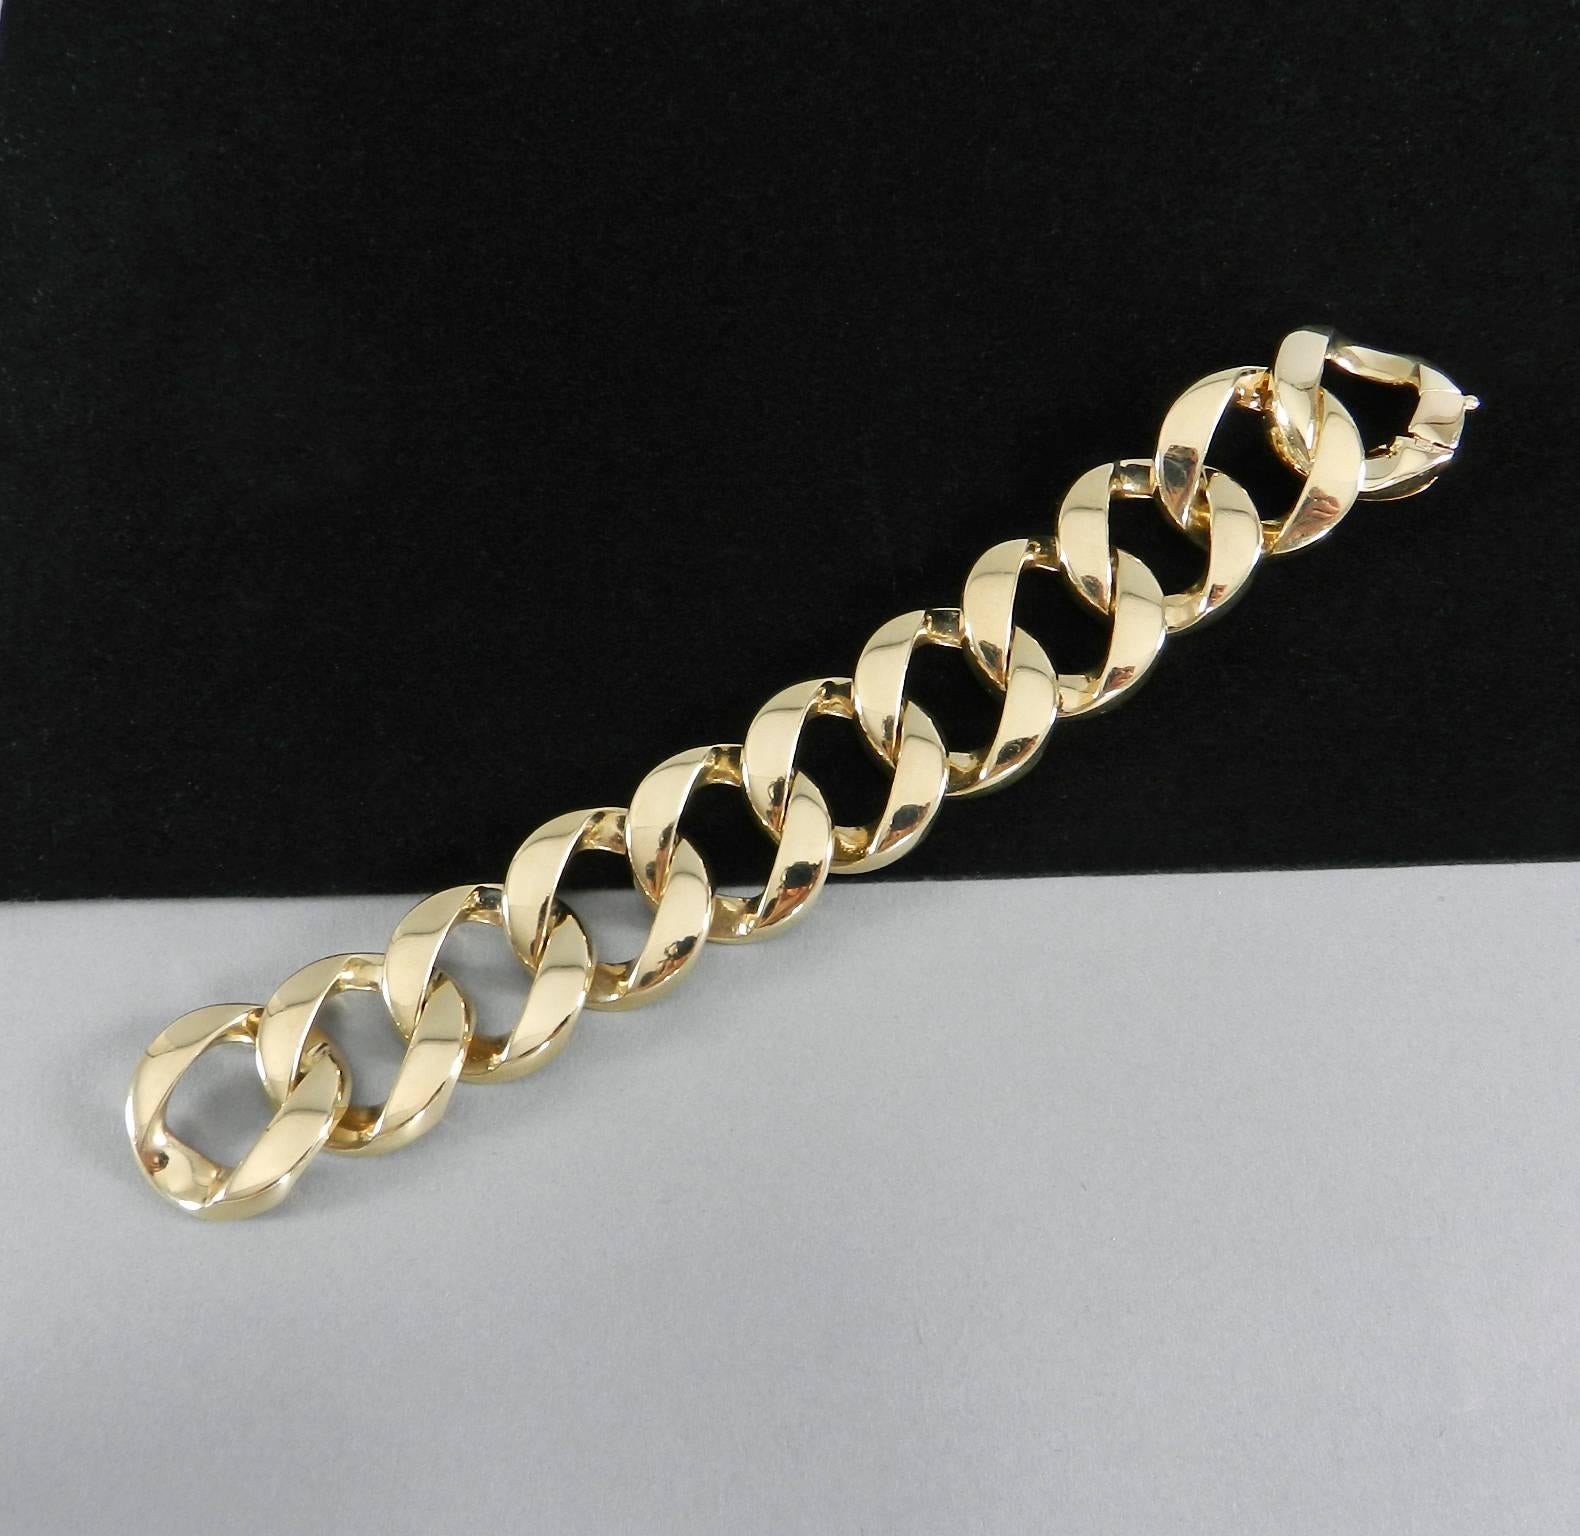 Verdura rare extra large heavy curb link chain bracelet in 14k yellow gold. Classic design originally created for Greta Garbo in the late 1930s.  11 links, 1" wide, interior circumference of 7".  Total weight 136.2 grams. Hallmarked